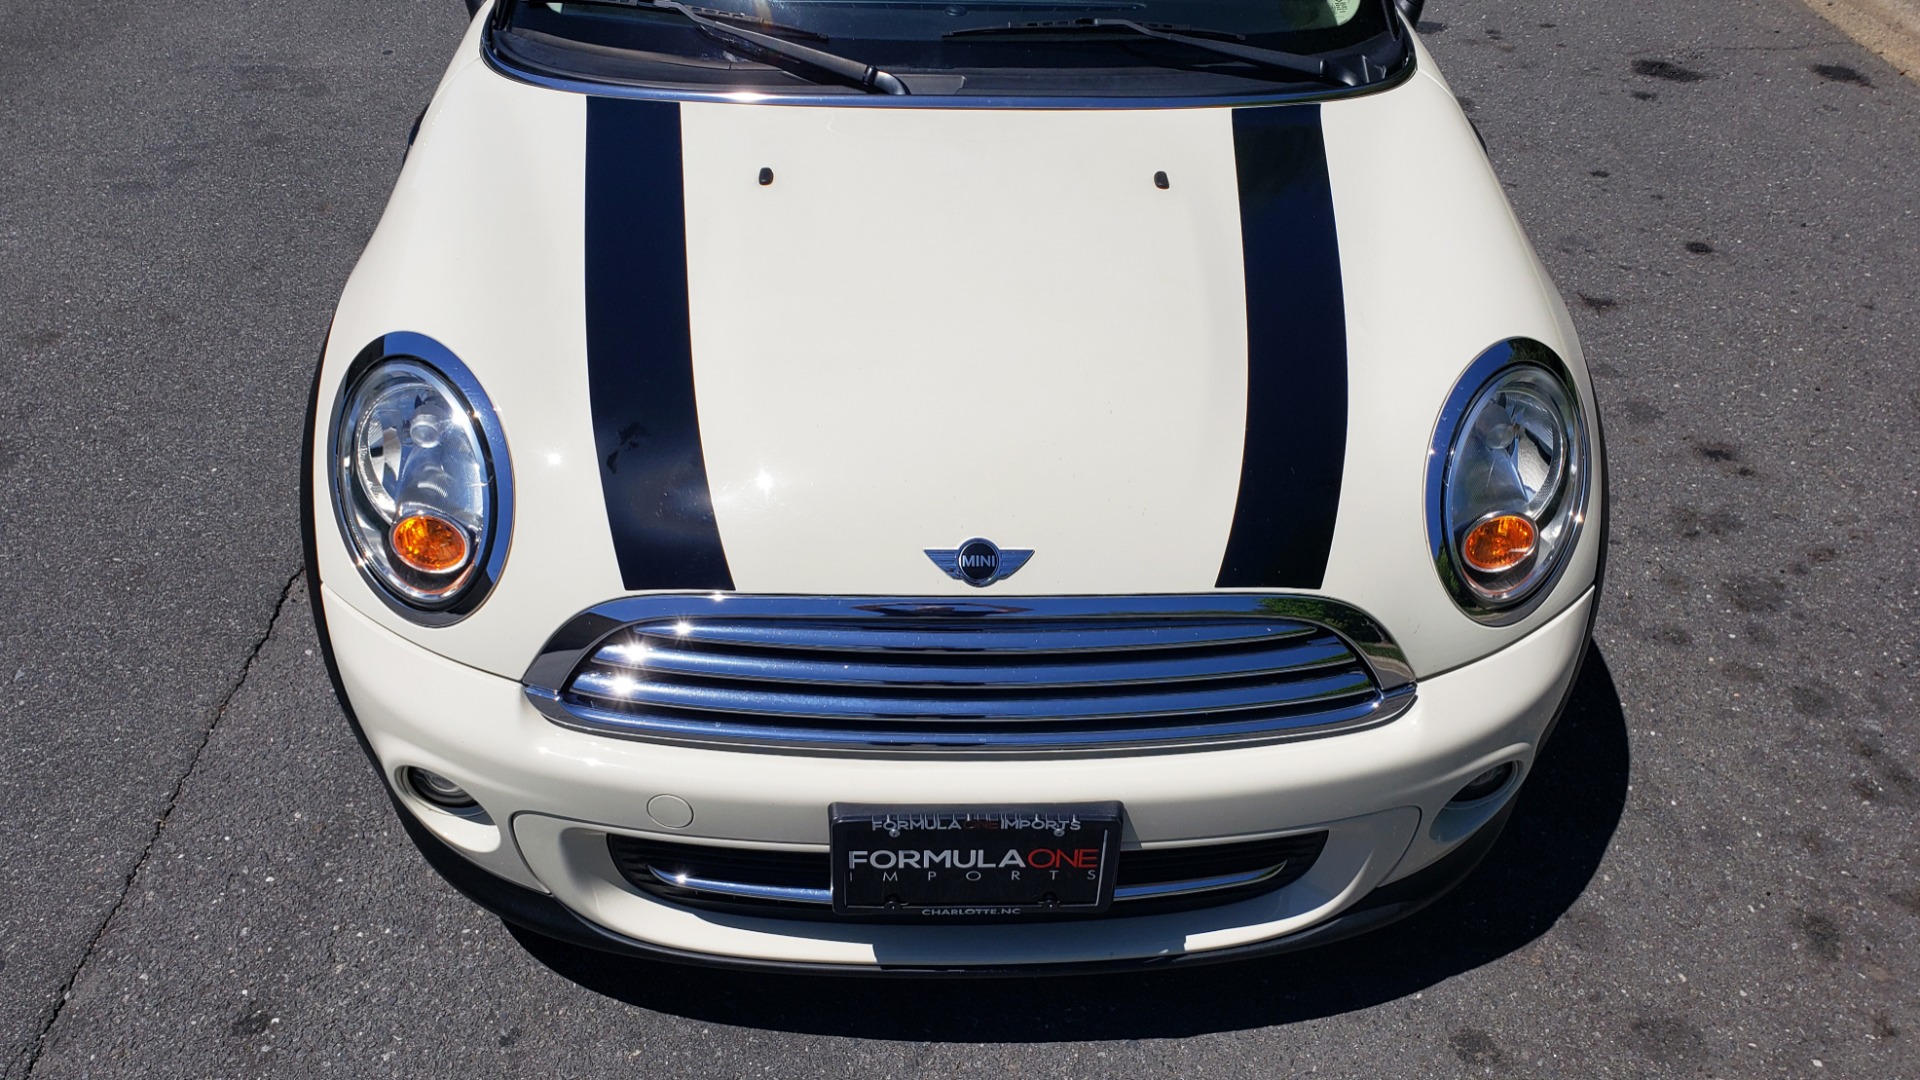 Used 2012 MINI COOPER HARDTOP 6-SPEED MANUAL / VERY CLEAN / 37 MPG for sale Sold at Formula Imports in Charlotte NC 28227 15